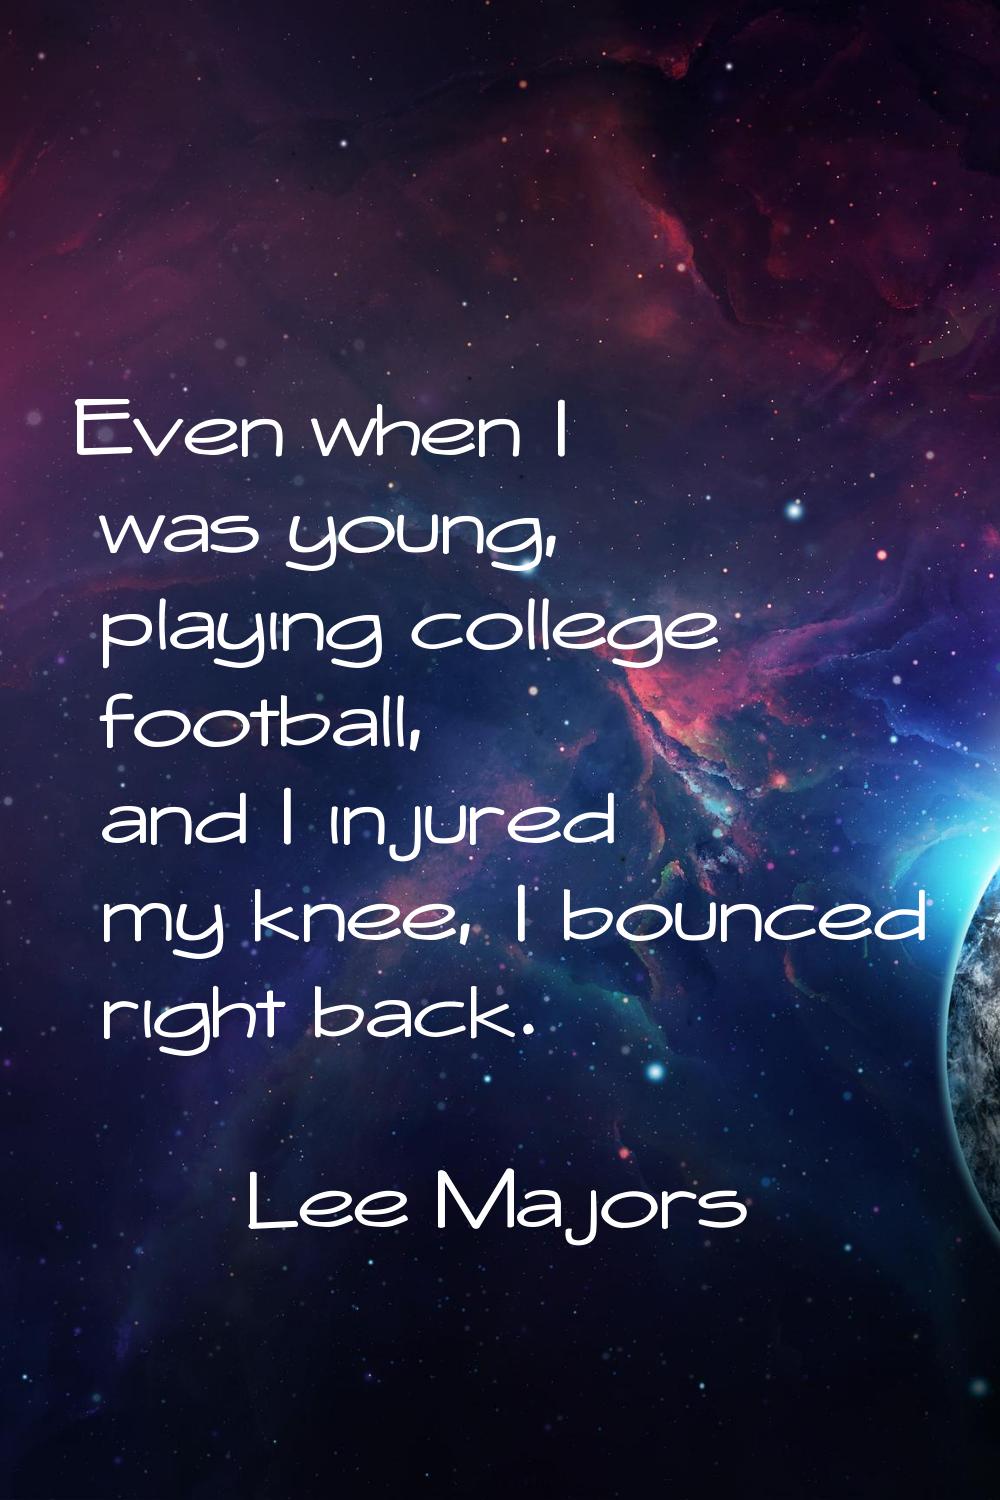 Even when I was young, playing college football, and I injured my knee, I bounced right back.